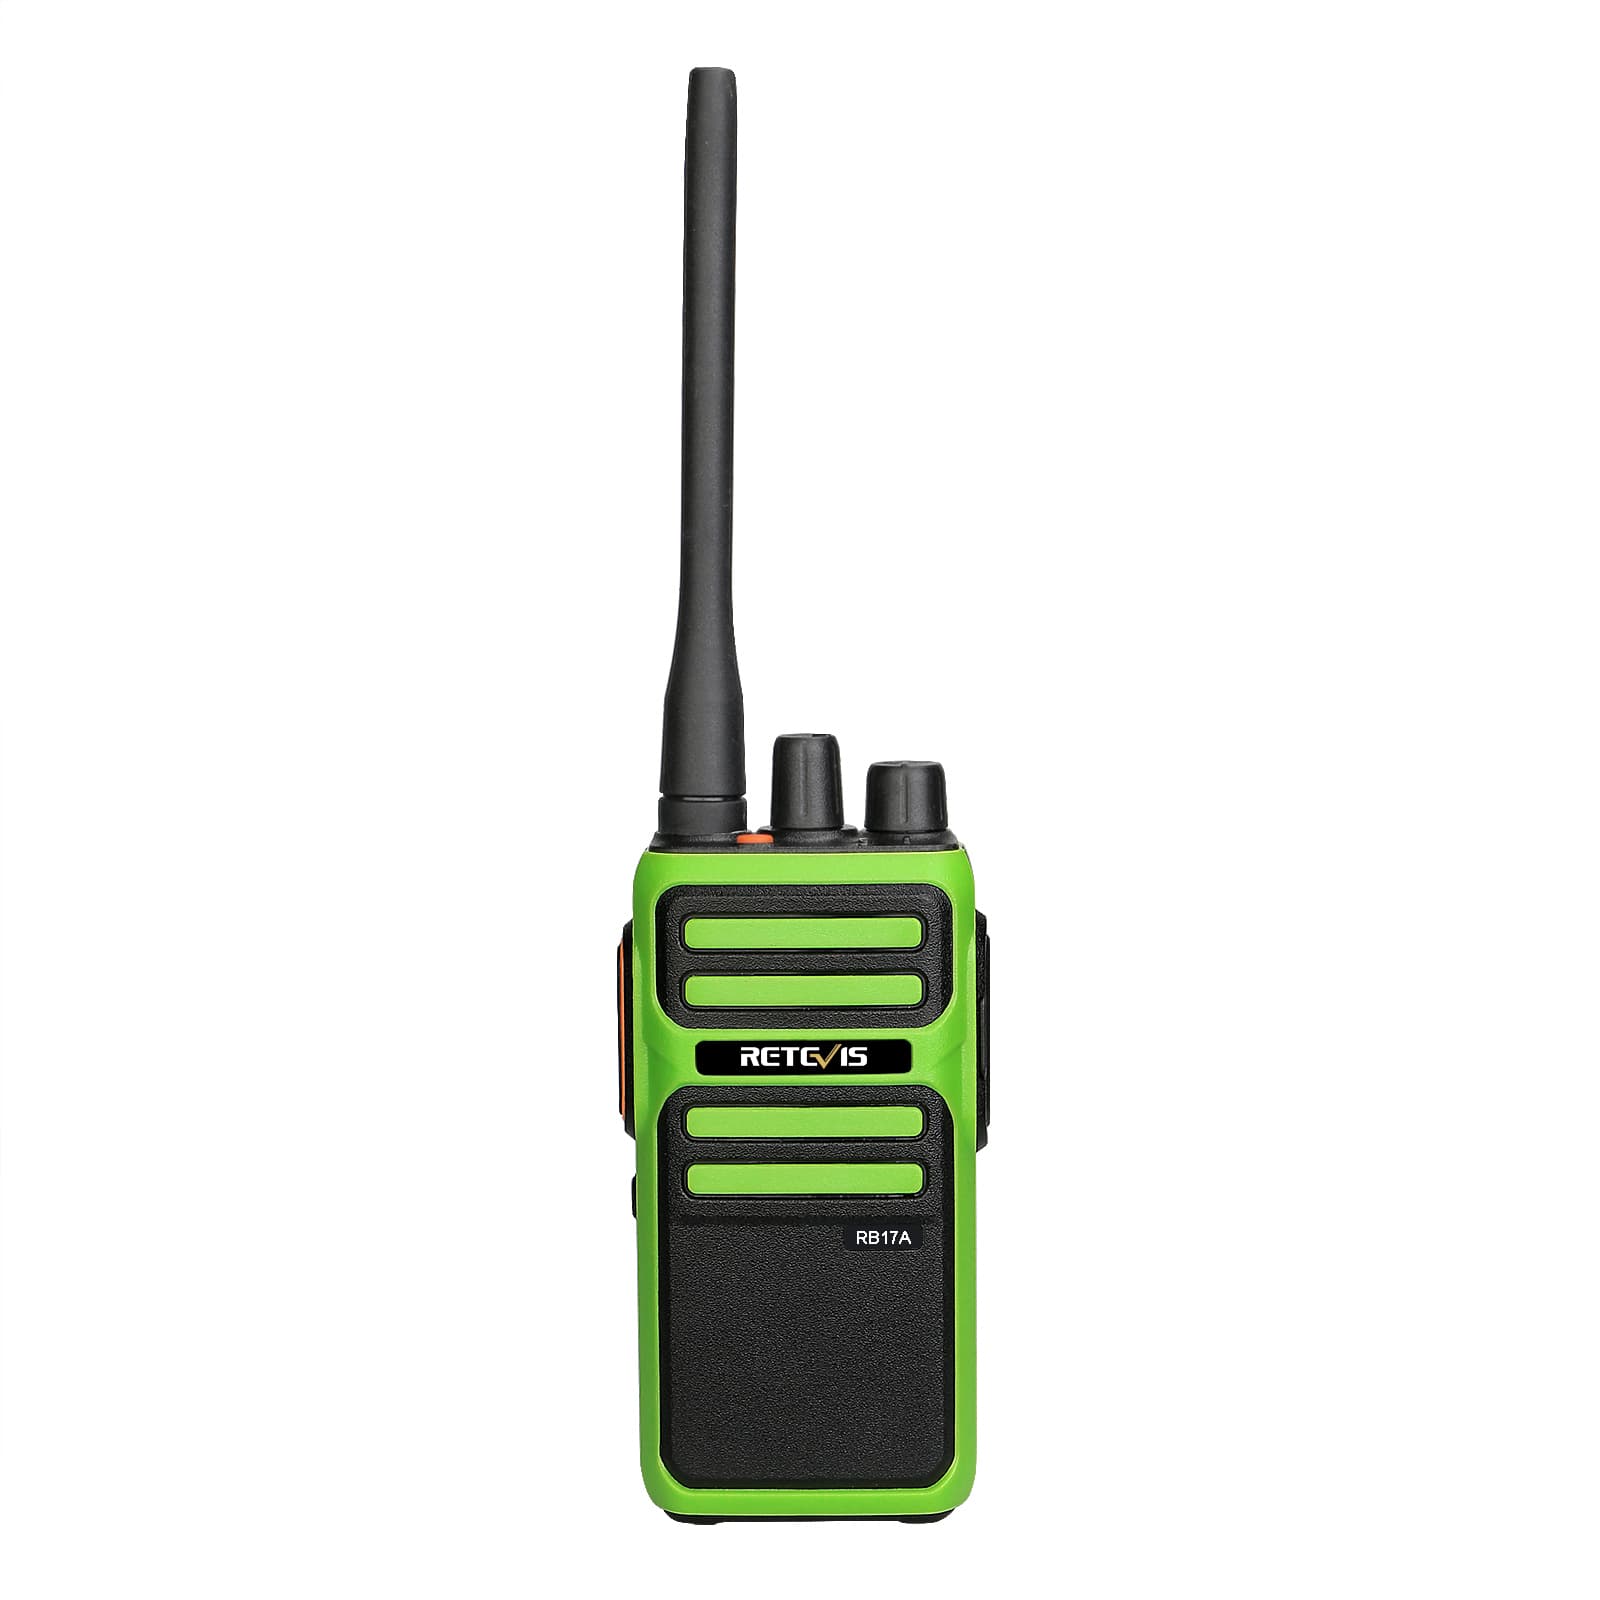 Retevis RB17A——New member of GMRS Radios